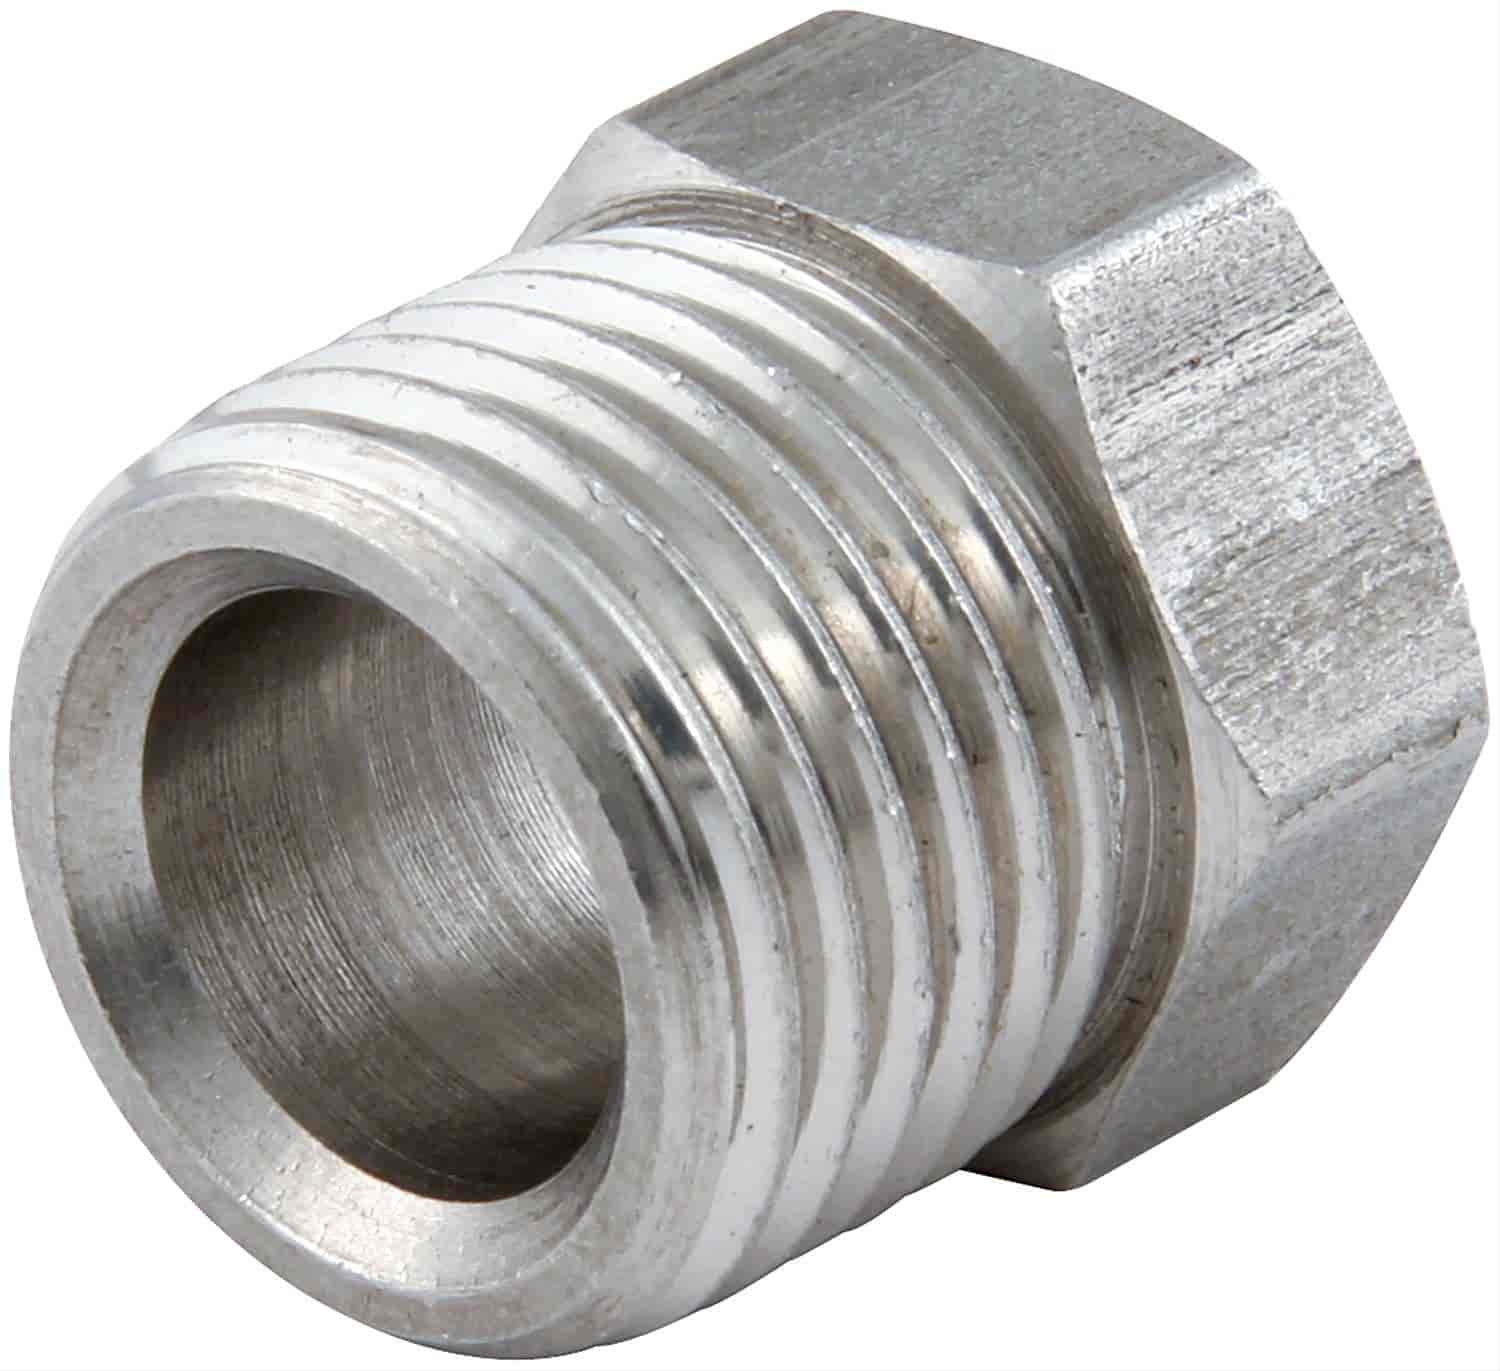 Allstar ALL50143 5/8-18 Thread for 3/8 Fuel Line Inverted Flare Nut, Pack of 4 